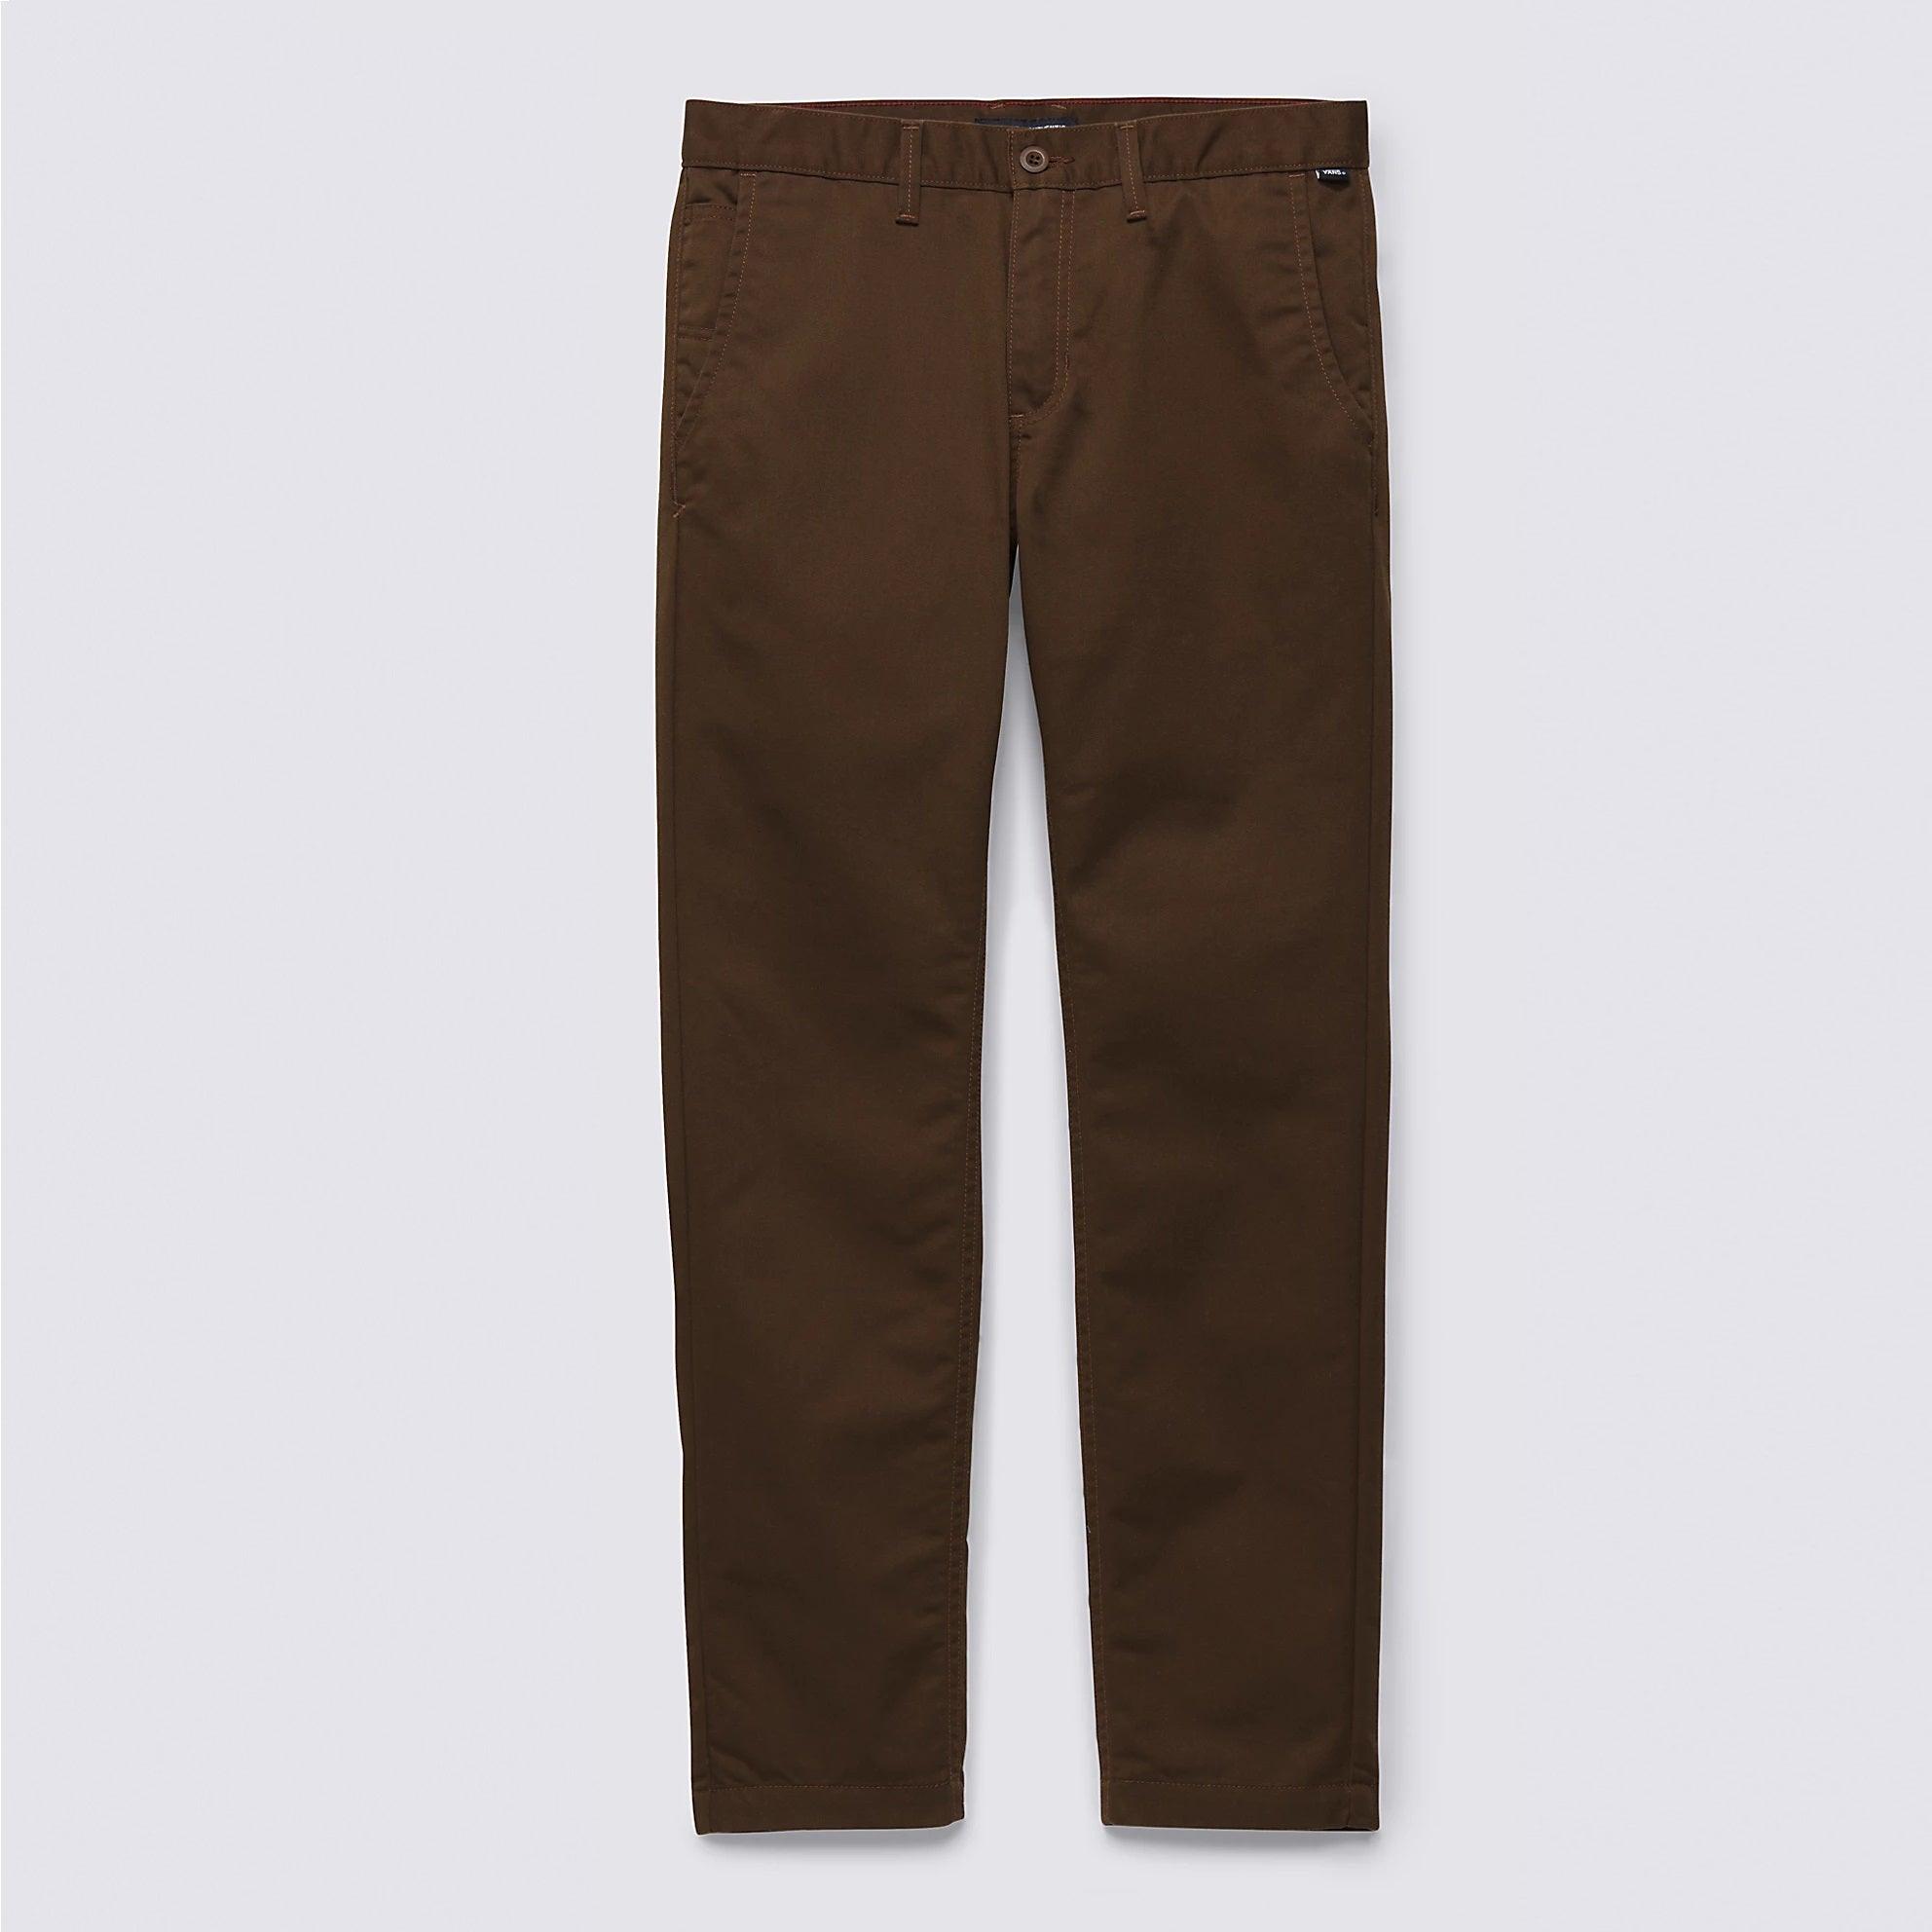 Buy Van Heusen Sport Men's Relaxed Fit Formal Trousers  (VSTF318S001343_Brown_30) at Amazon.in